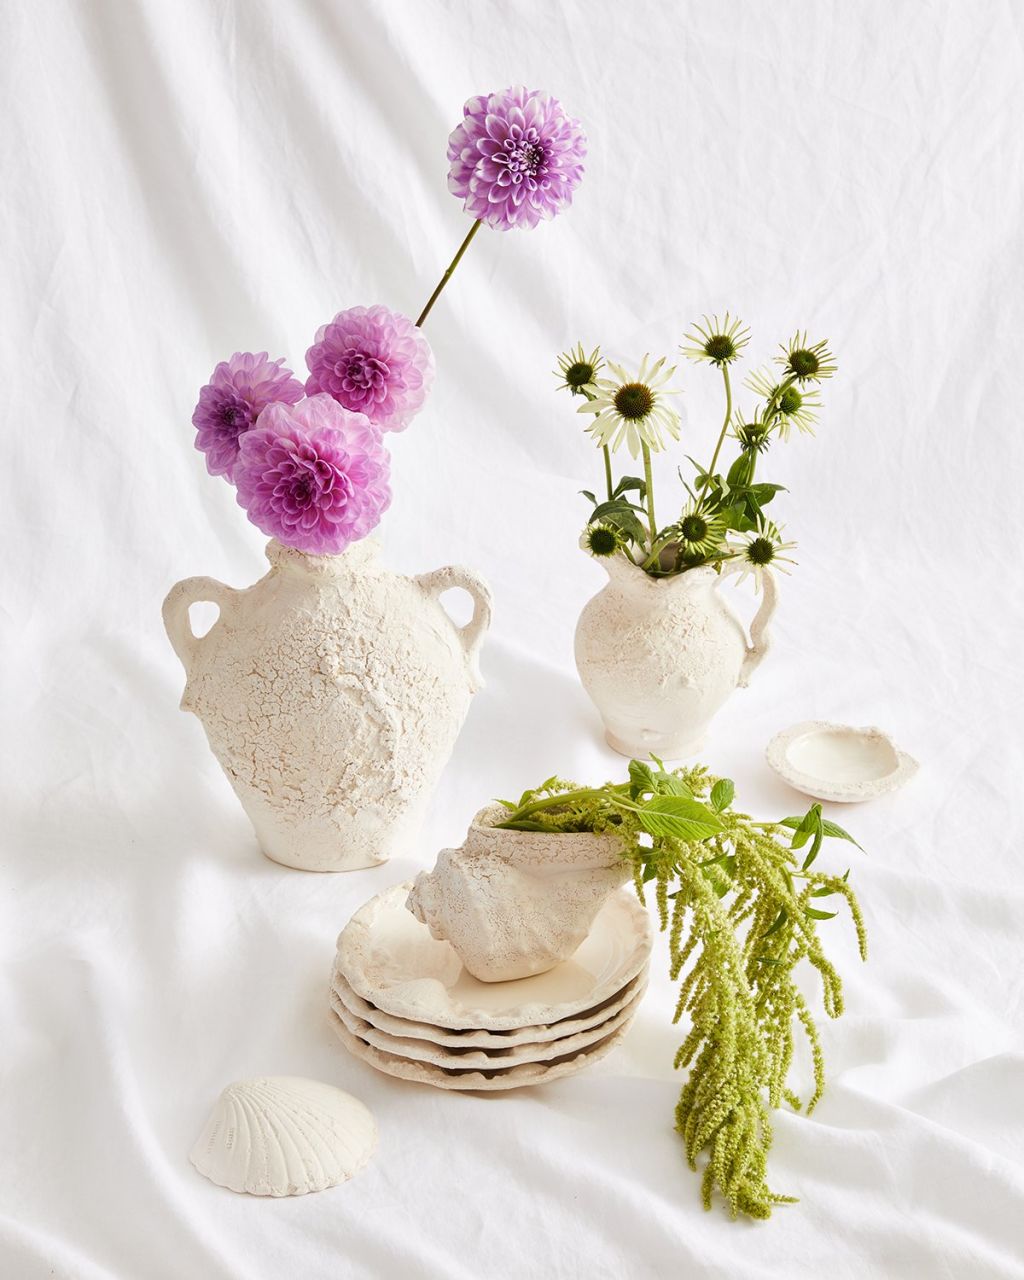 Ceramics from Bed Threads. Photo: Supplied